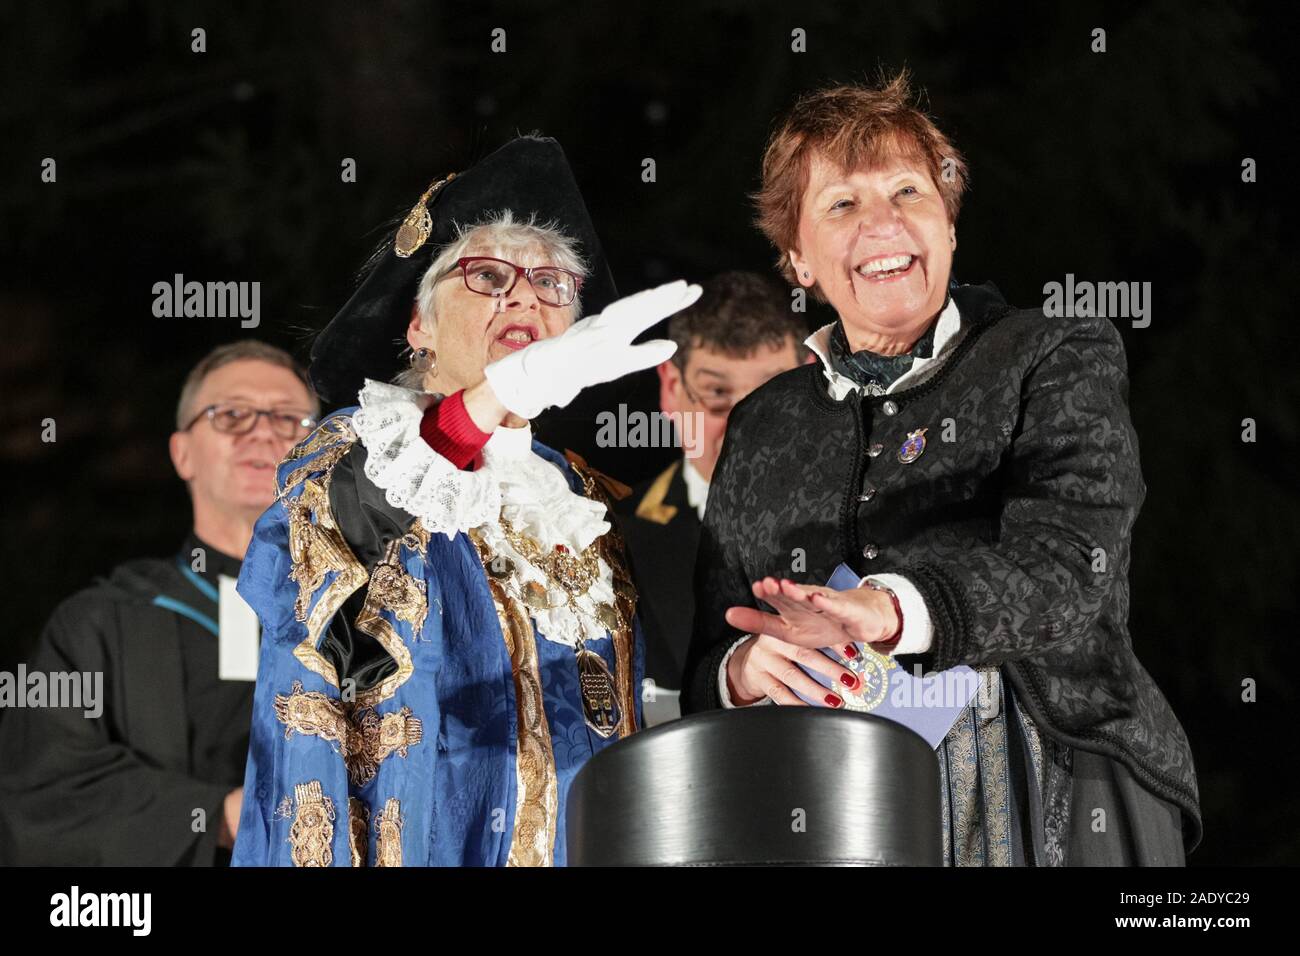 Trafalgar Square, Westminster, London, UK, 05th Dec 2019. Switch on time - The Lord Mayor of Westminster, Ruth Bush and Mayor of Oslo, Marianne Borgen press the switch on button. The 21m tall Trafalgar Square Christmas Tree is switched on with a ceremony in the square. By tradition, the Norwegian spruce tree is donated by Oslo to the people of London for their help during WW2. Dignitaries lighting the tree include Lord Mayor of Westminster, Cllt Ruth Bush, Mayor of Oslo, Marianne Borgen, Norwegian Ambassador HE Wegger Strommen and British Ambassador to Norway HE Richard Wood. Stock Photo